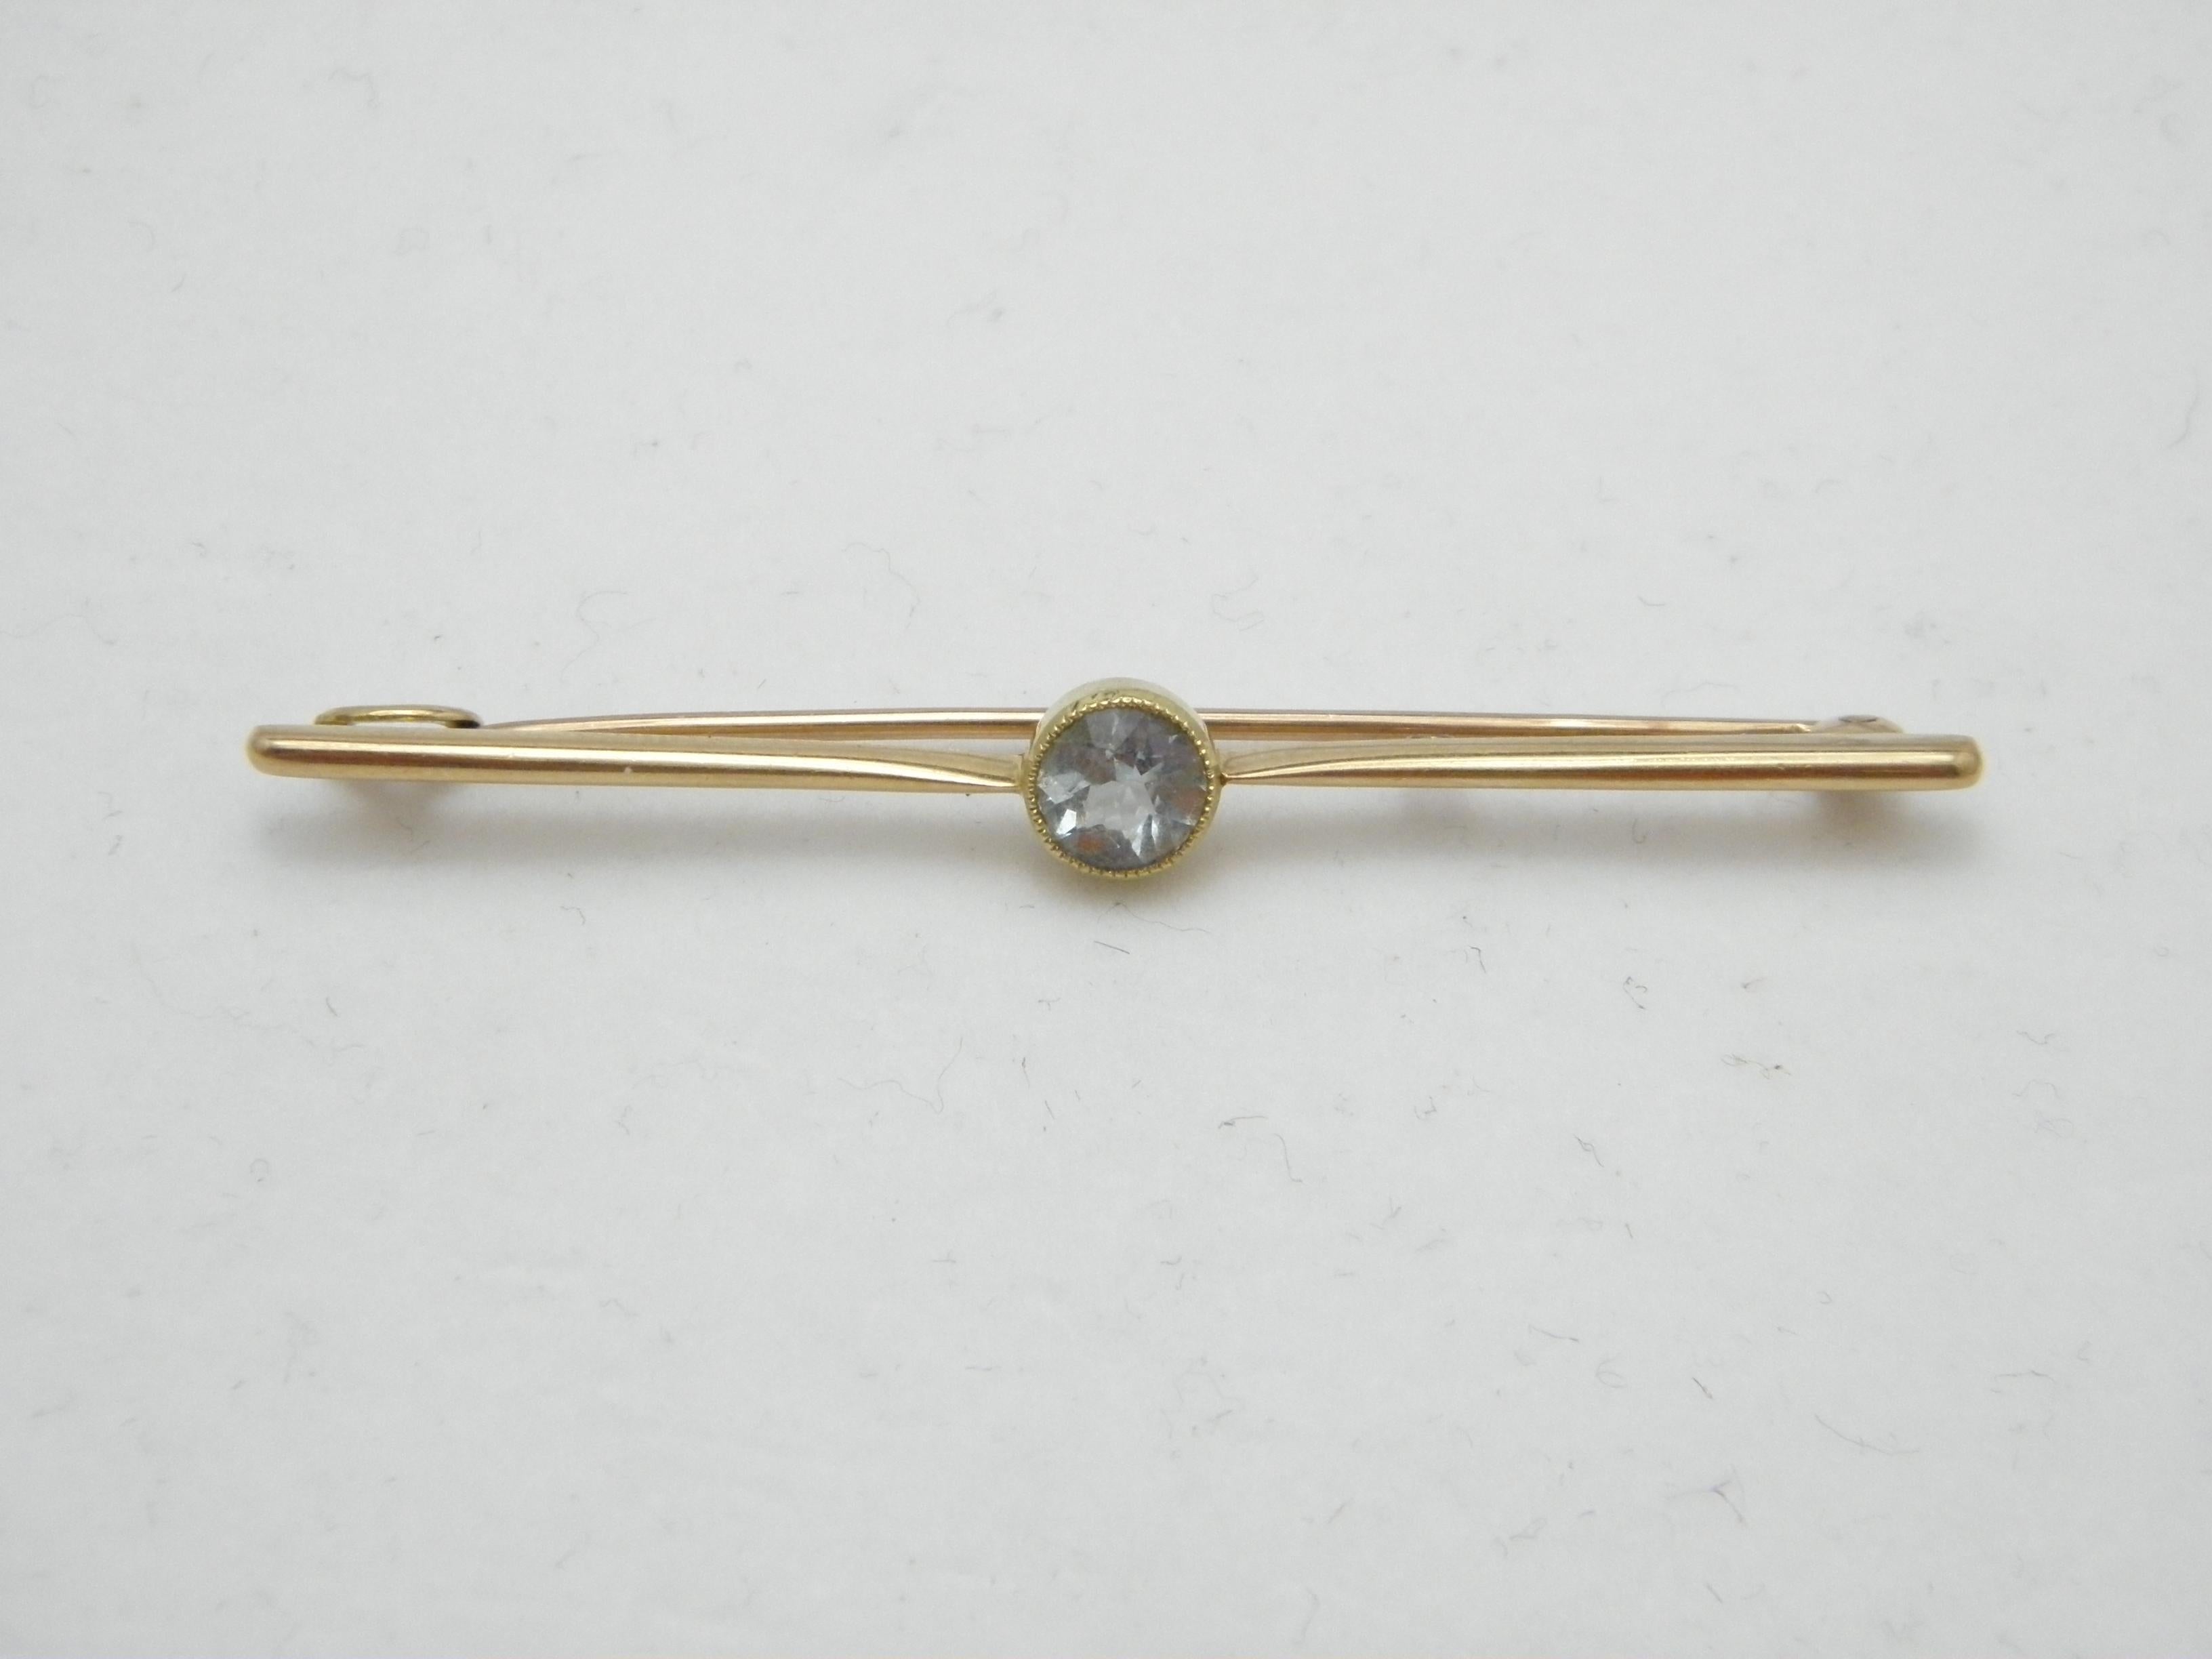 If you have landed on this page then you have an eye for beauty.

On offer is this stunning

15CT SOLID ROSE GOLD AQUAMARINE SOLITAIRE BAR BROOCH

DETAILS
Material: 15ct (625/000) Solid Heavy Yellow Gold
Style: Victorian classic brooch / pin in the